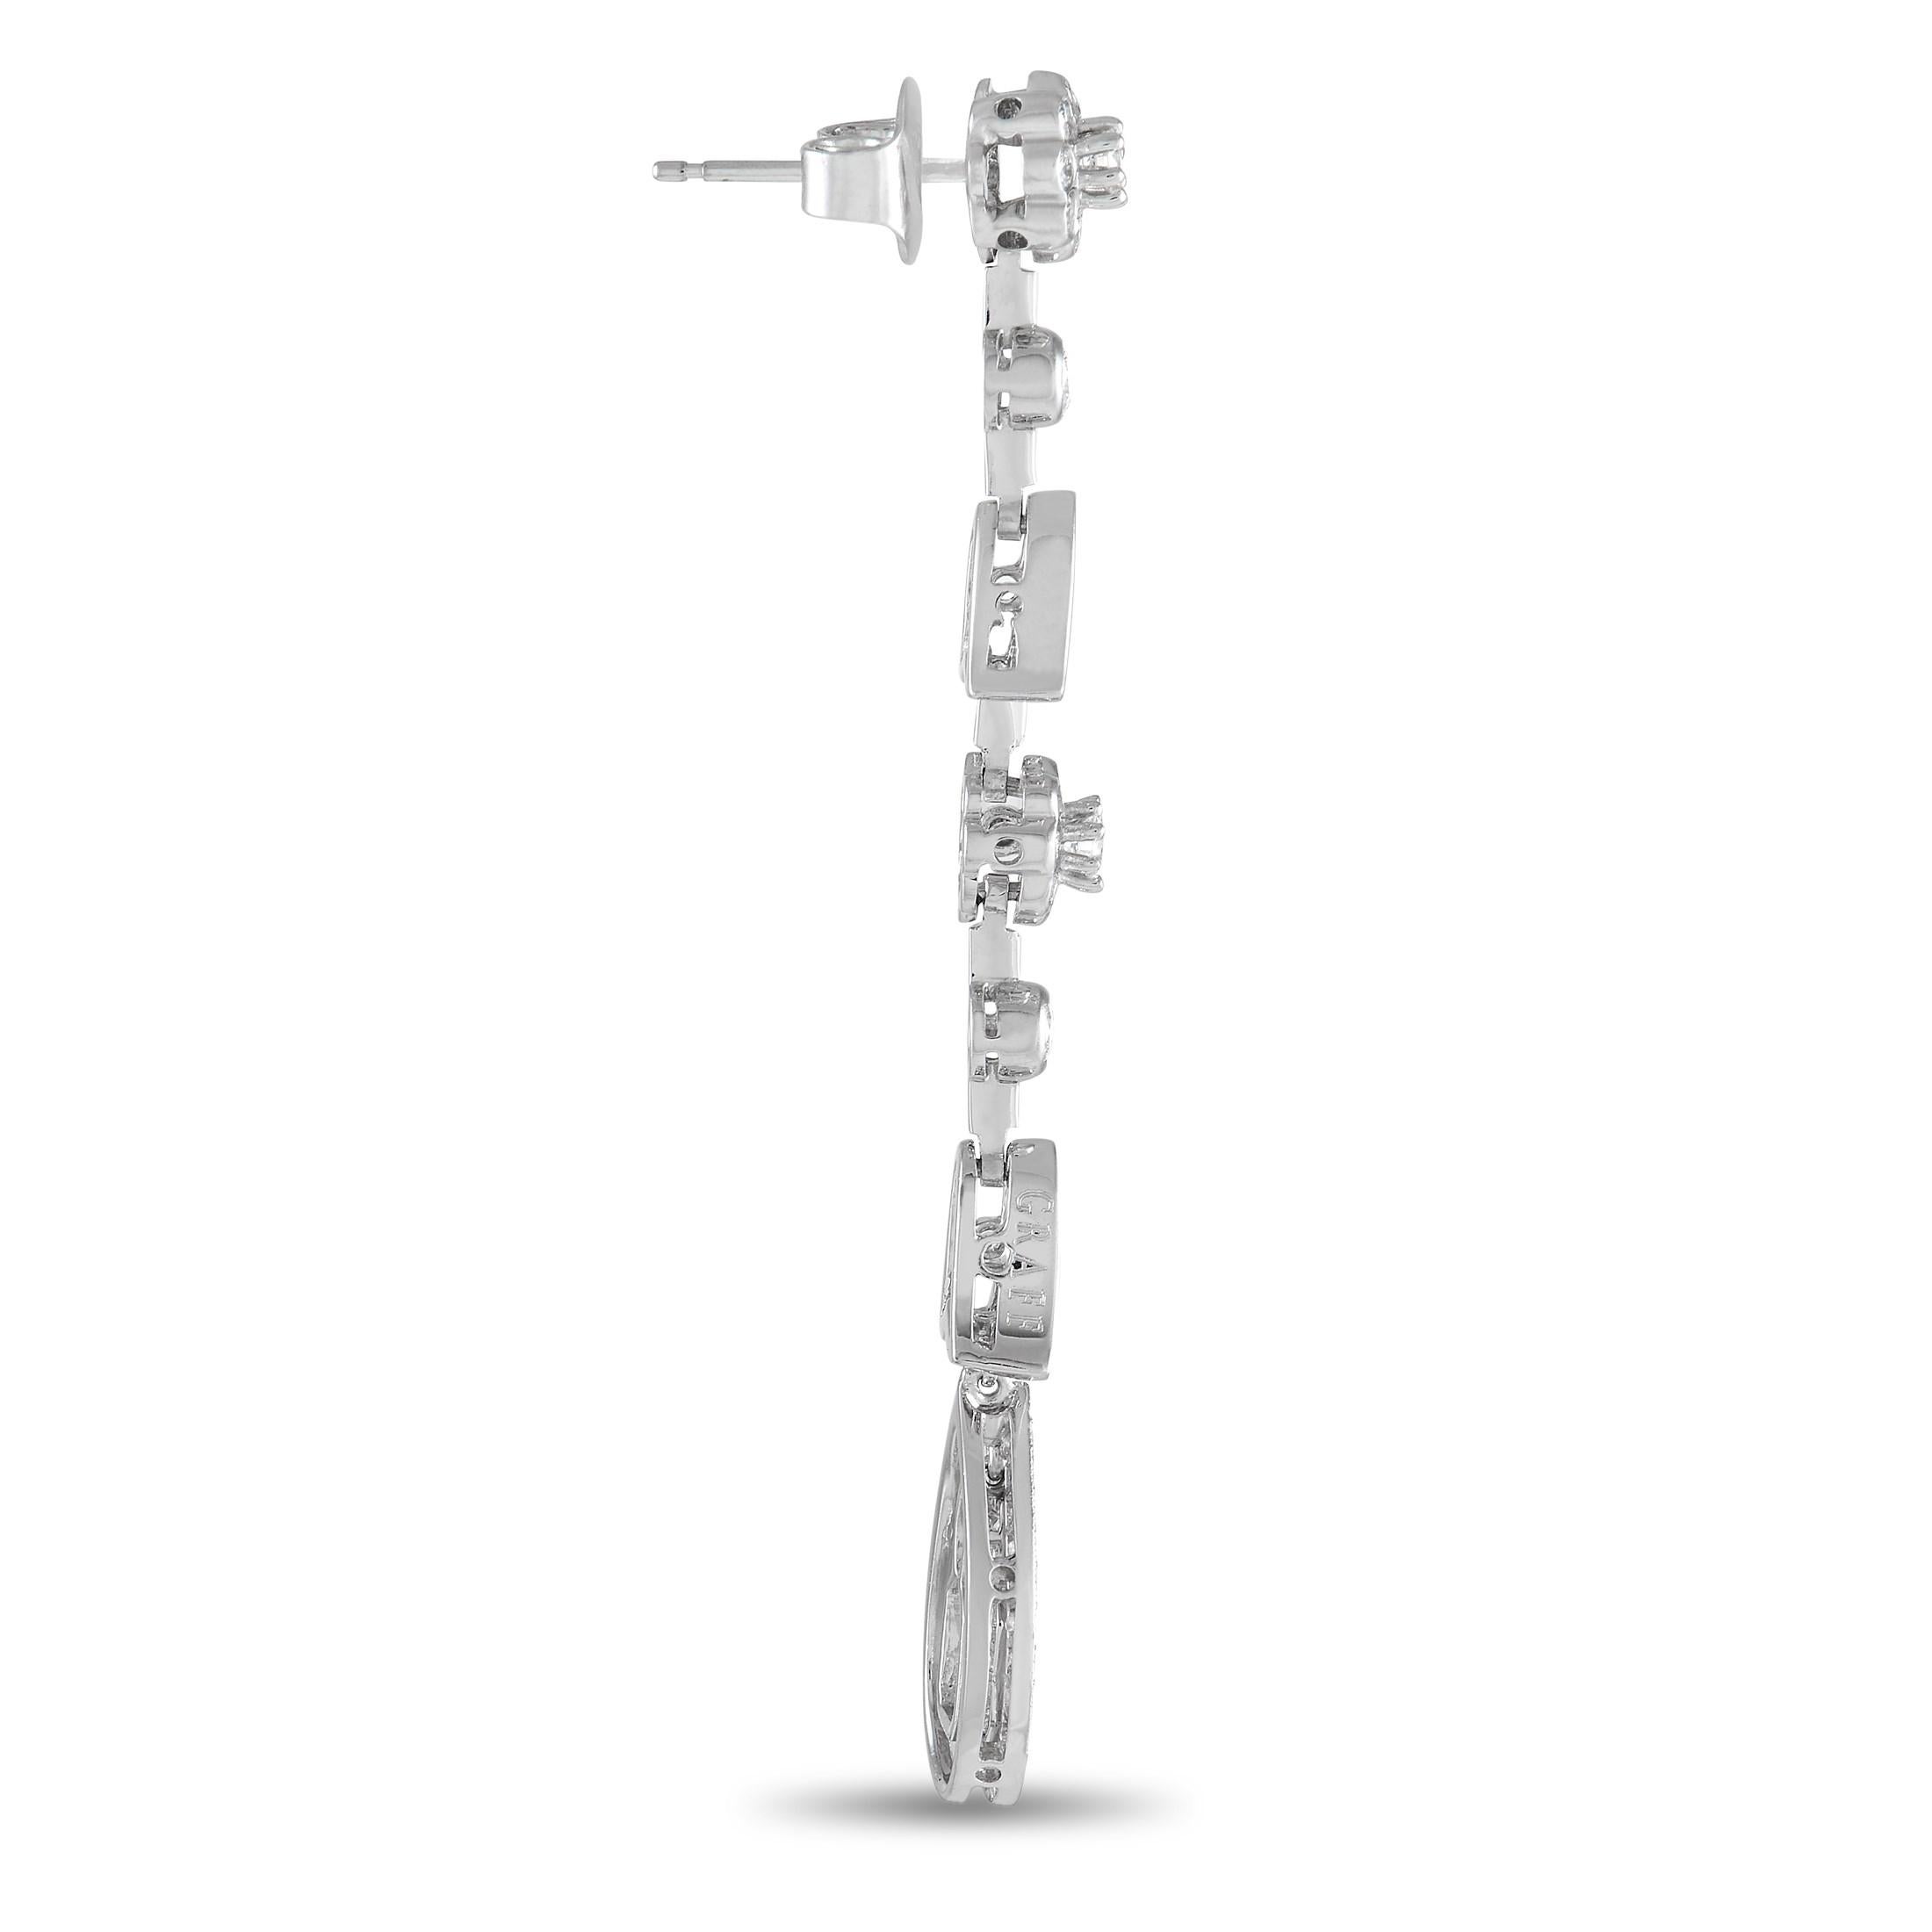 Make any outfit blossom with elegance by wearing this Graff platinum tulip chandelier earrings. Dropping from the earlobe is a platinum strand with a floral motif and 3.00 carat diamond embellishment. The diamonds have an E color grade and VVS